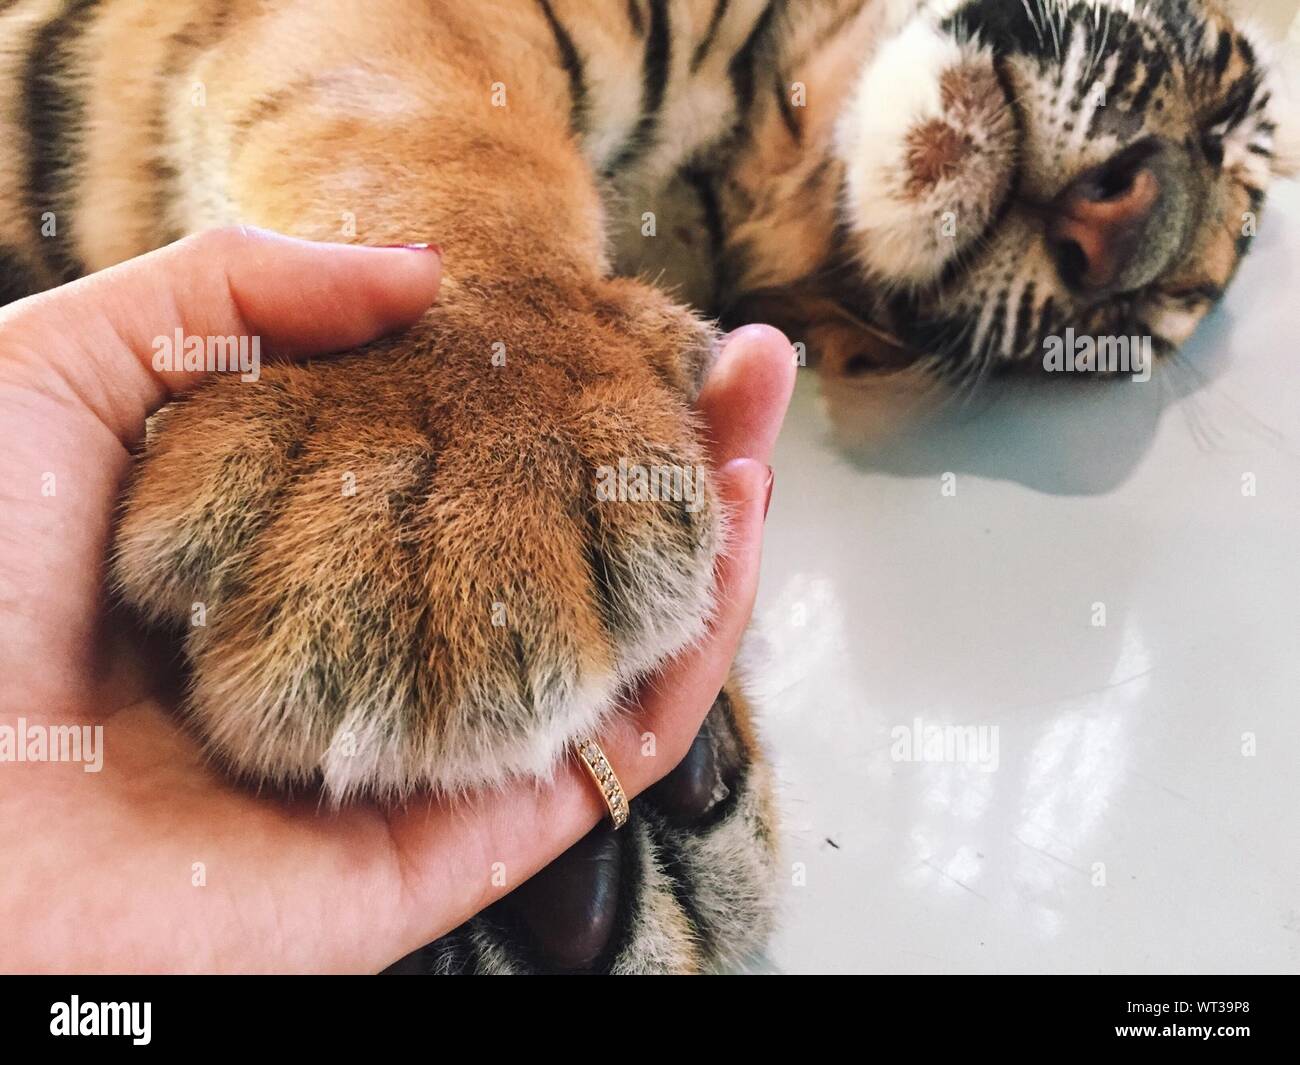 Tiger Paw High Resolution Stock Photography and Images - Alamy